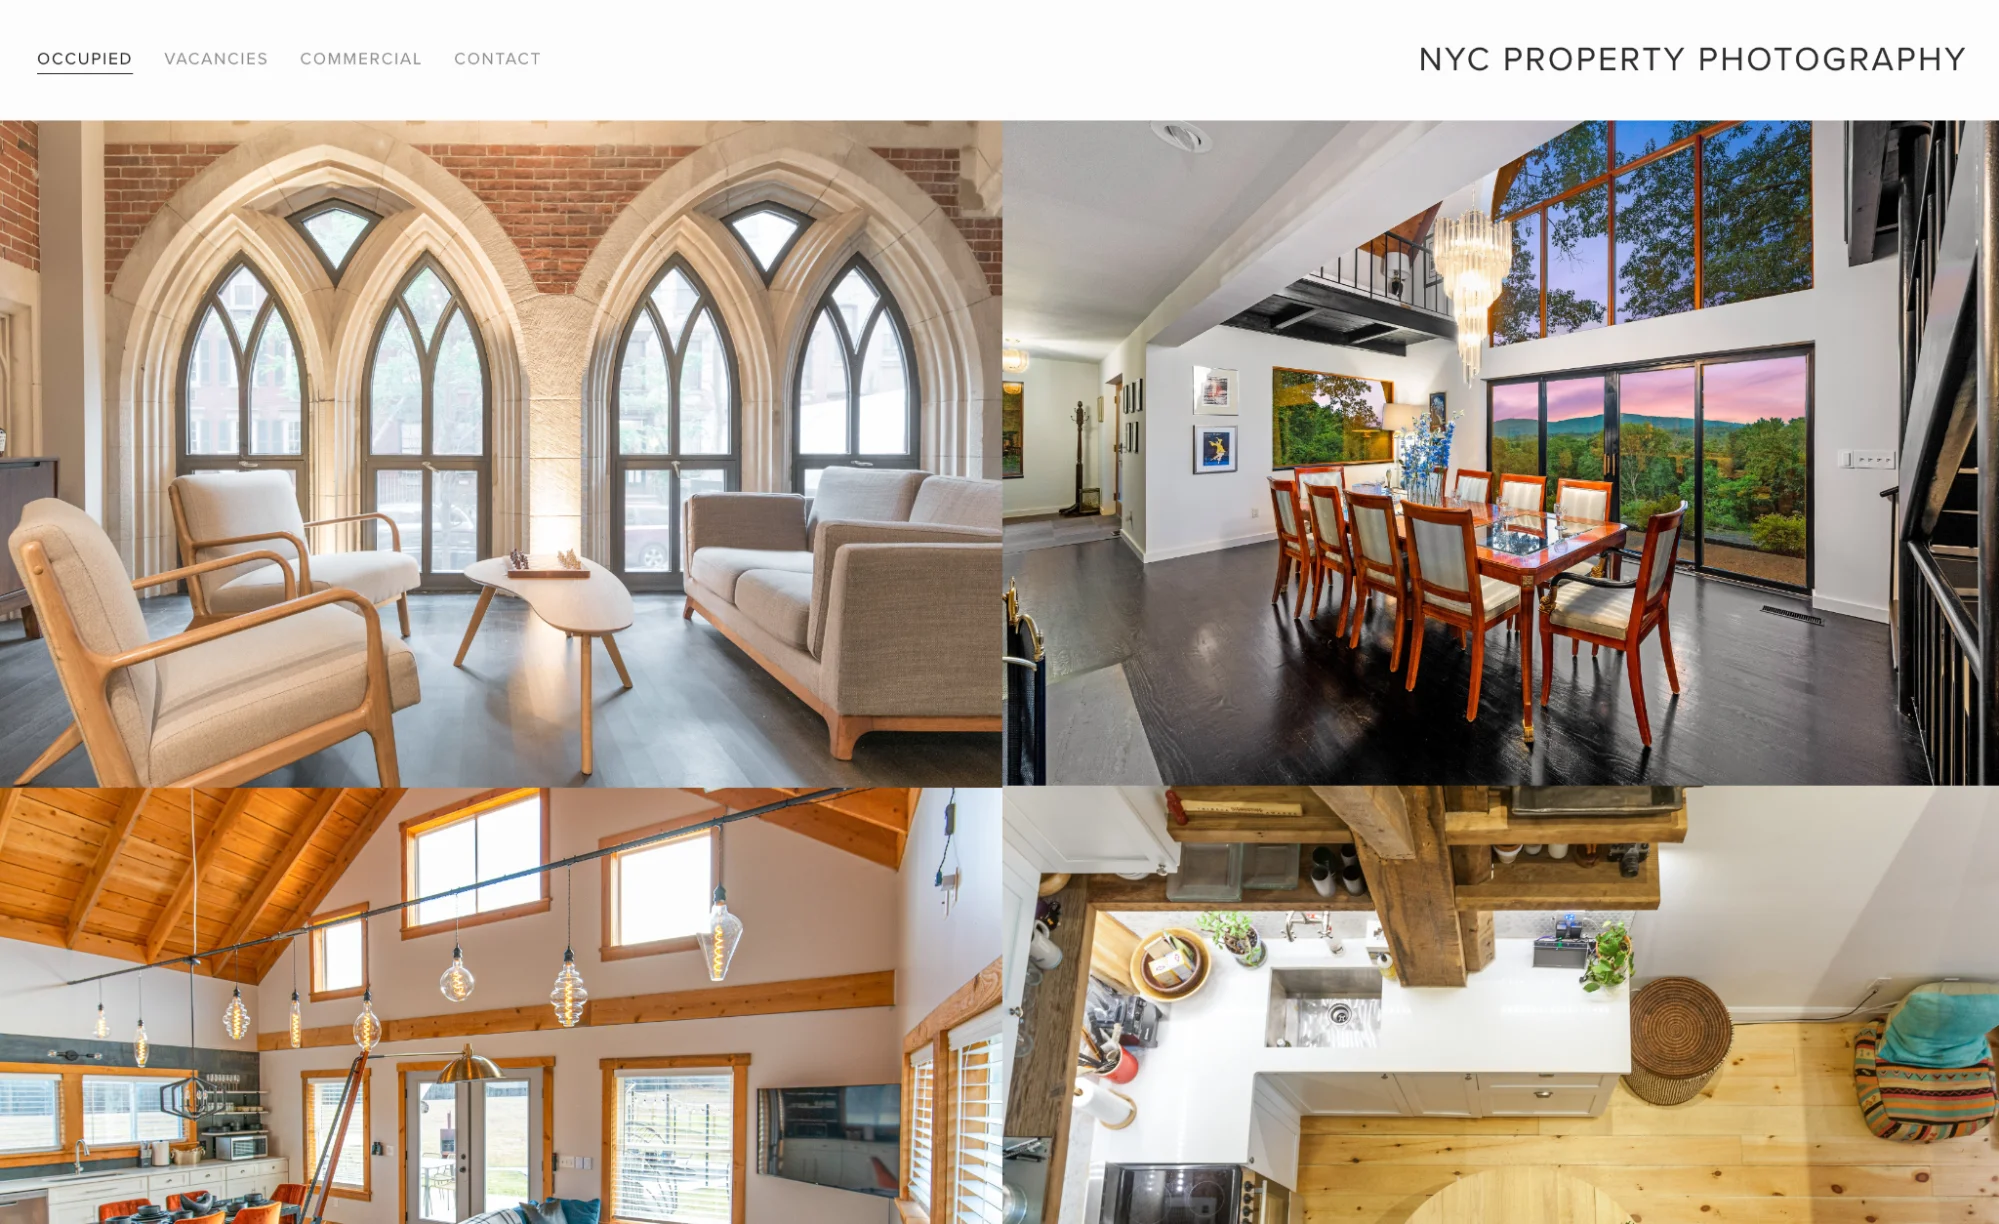 NYC Property Photography